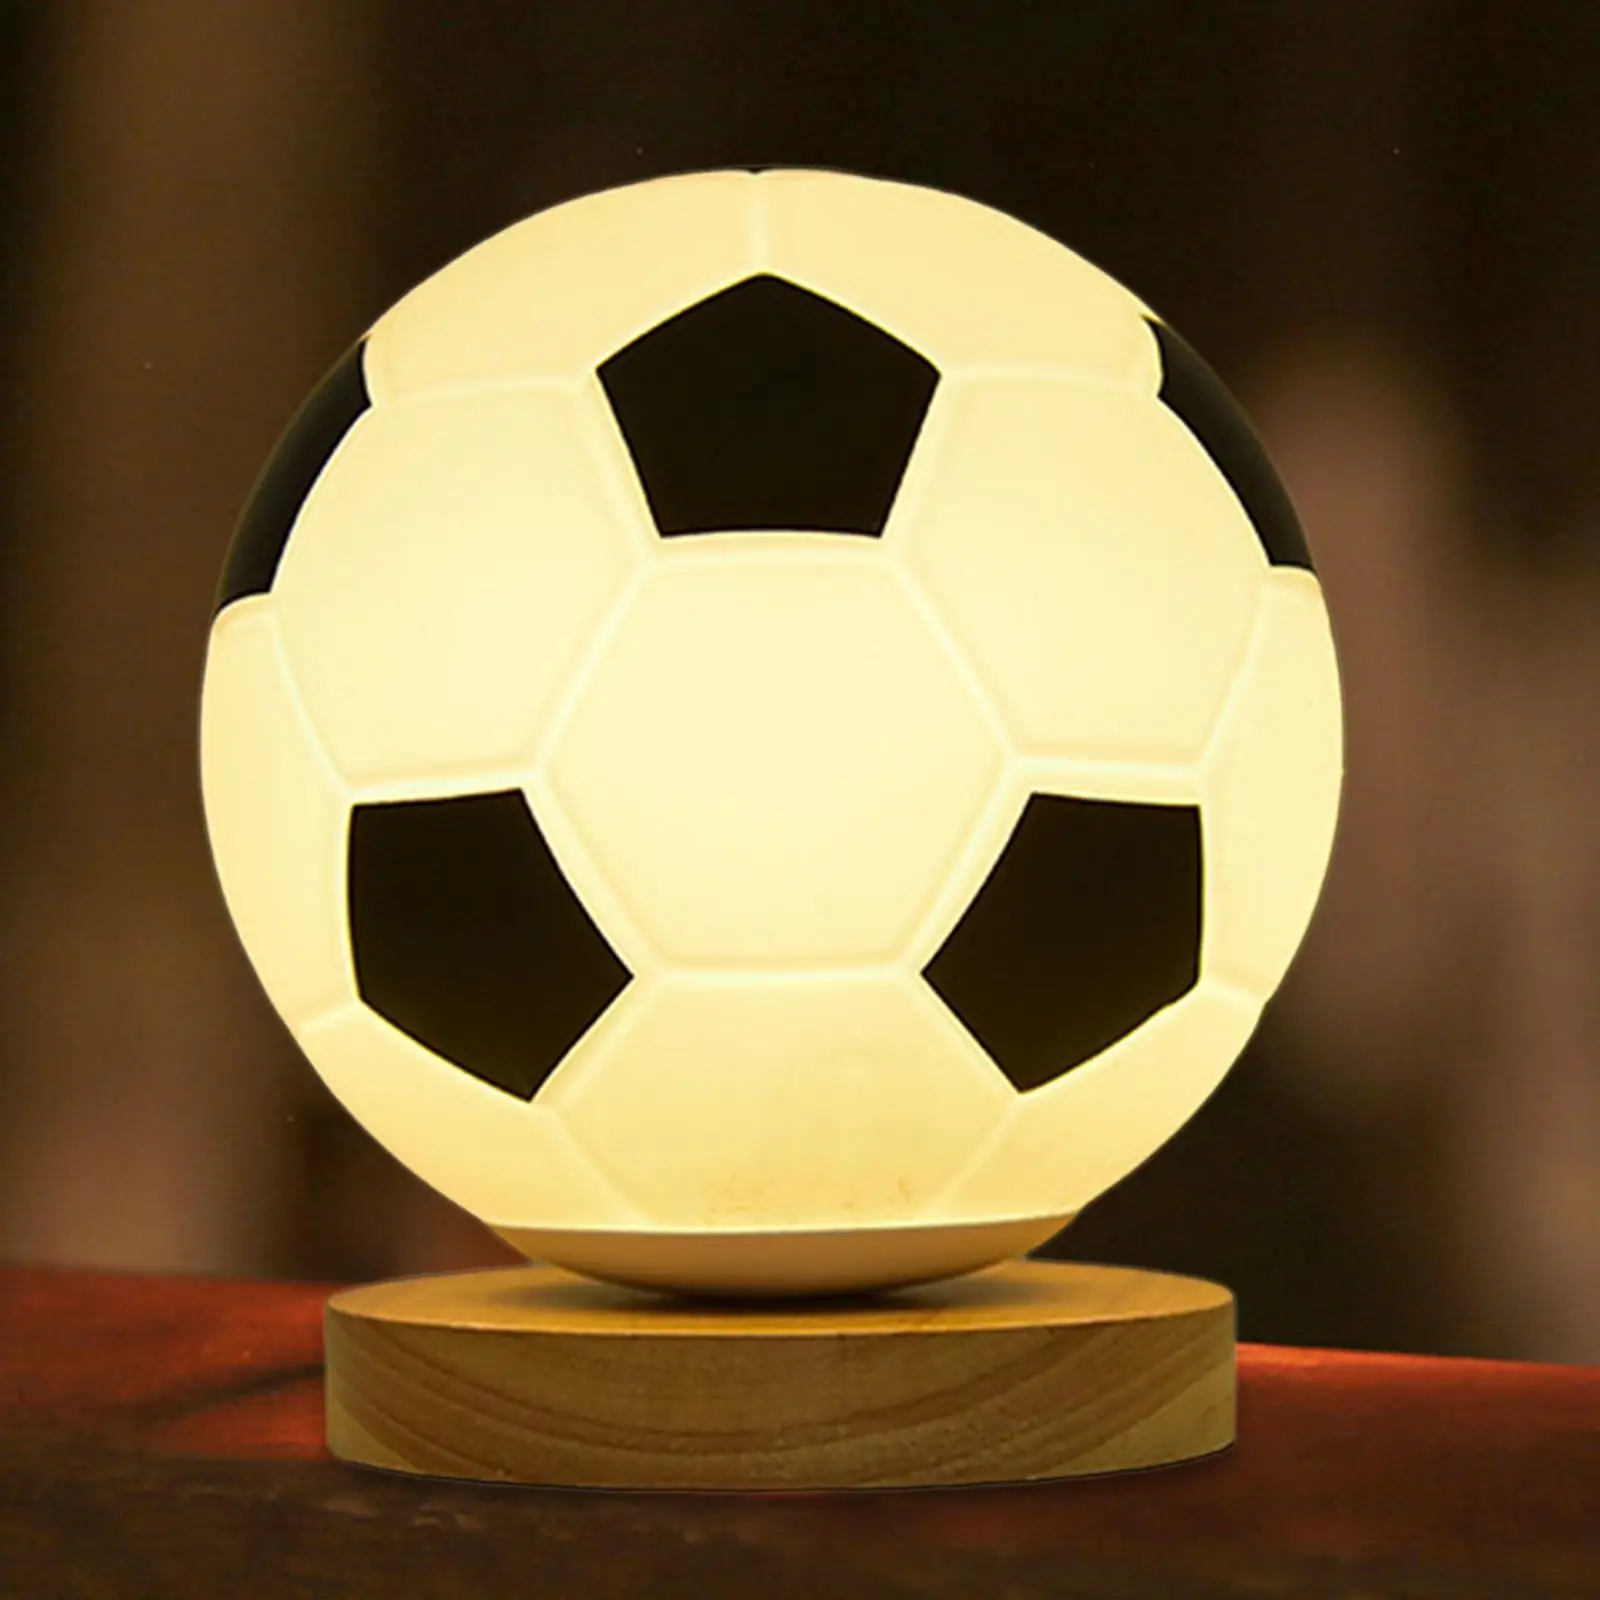 3D Soccer Lamp USB Powered Solid Wood Base Warm White Brightness Adjustable for Study Kids Gift